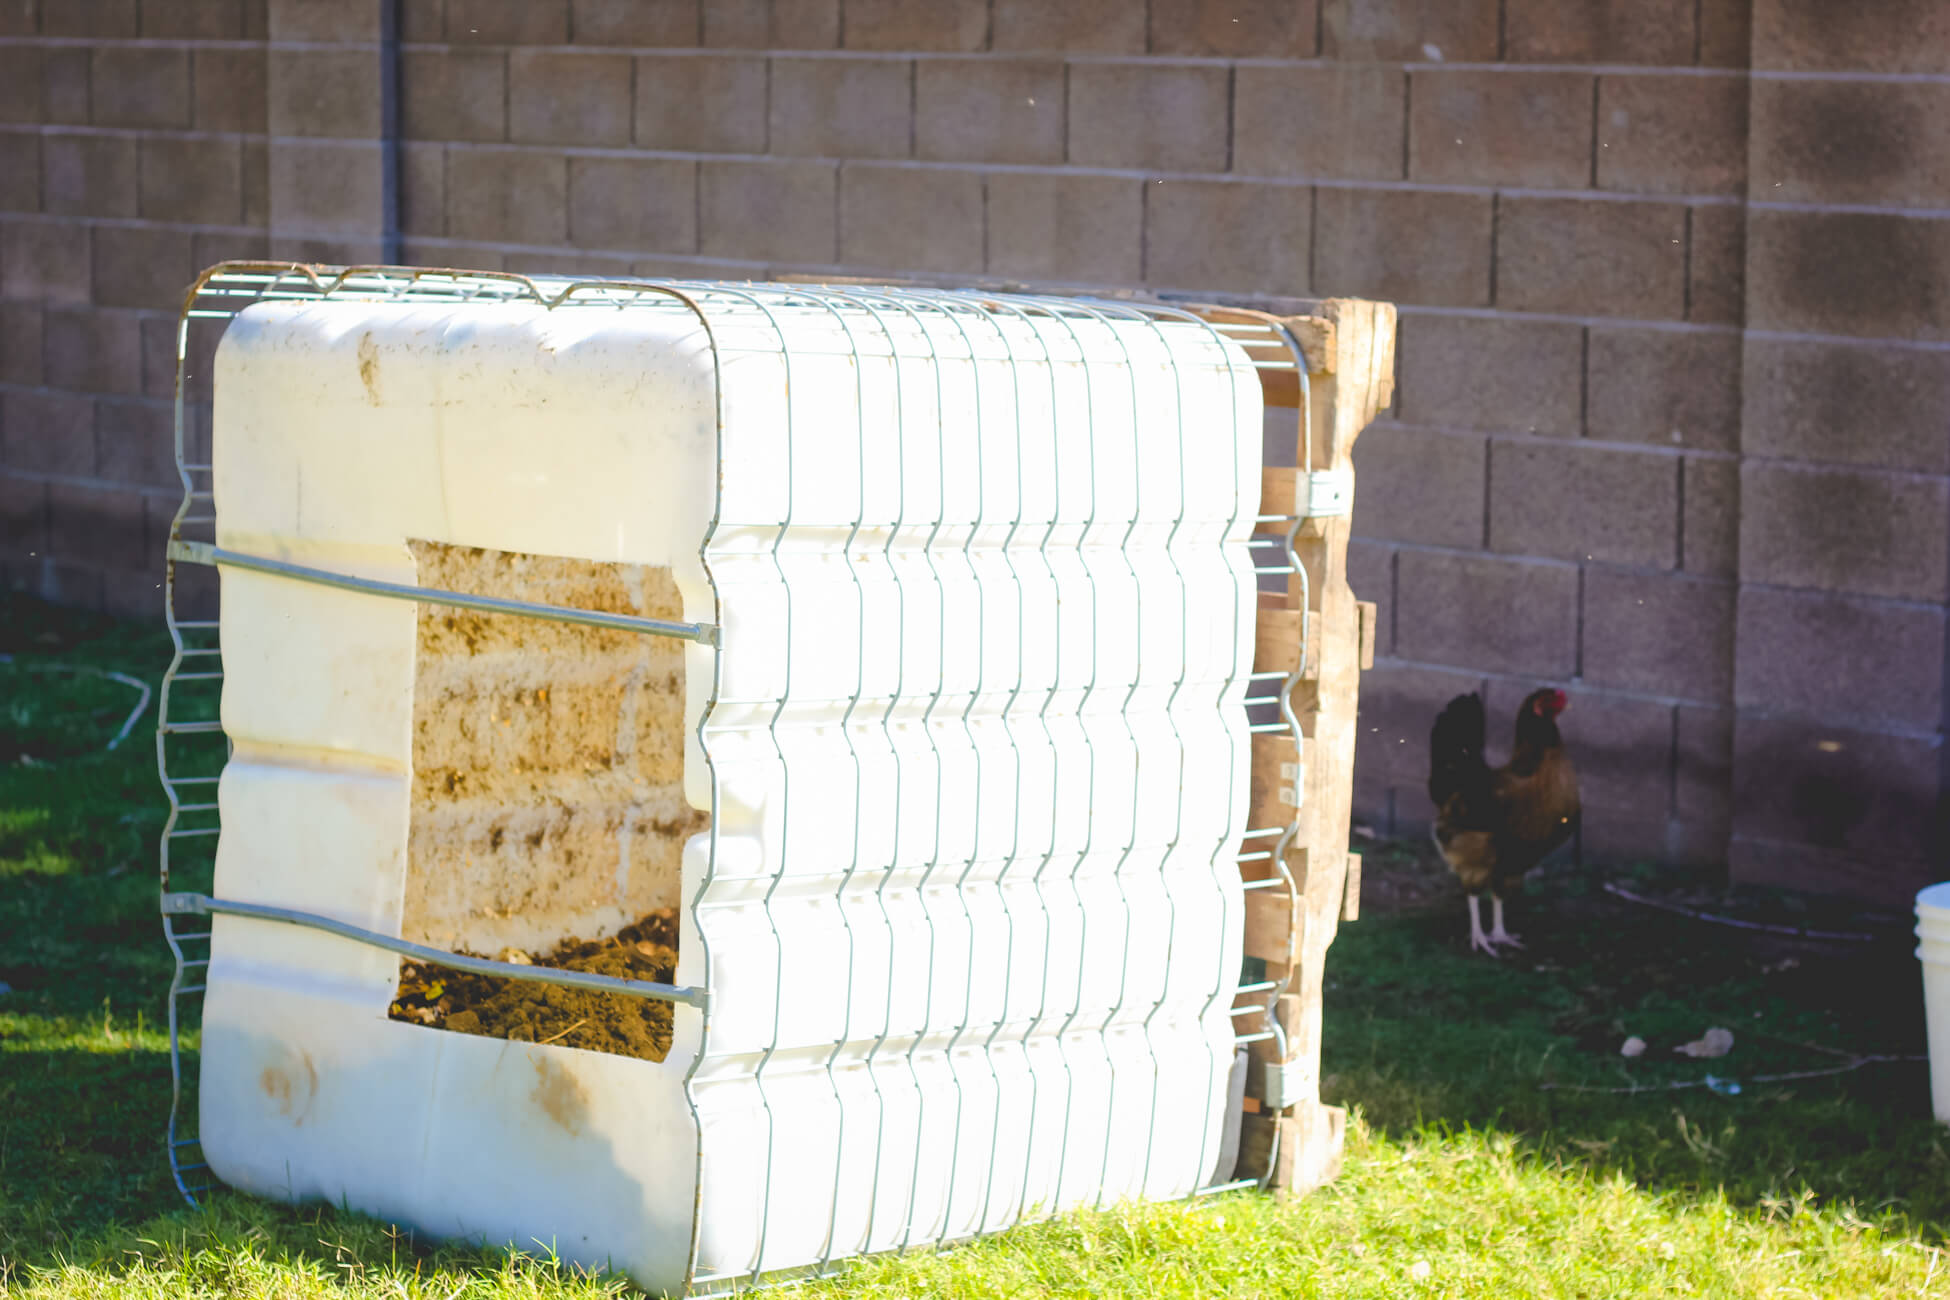 Water tank compost bin with chicken looking on